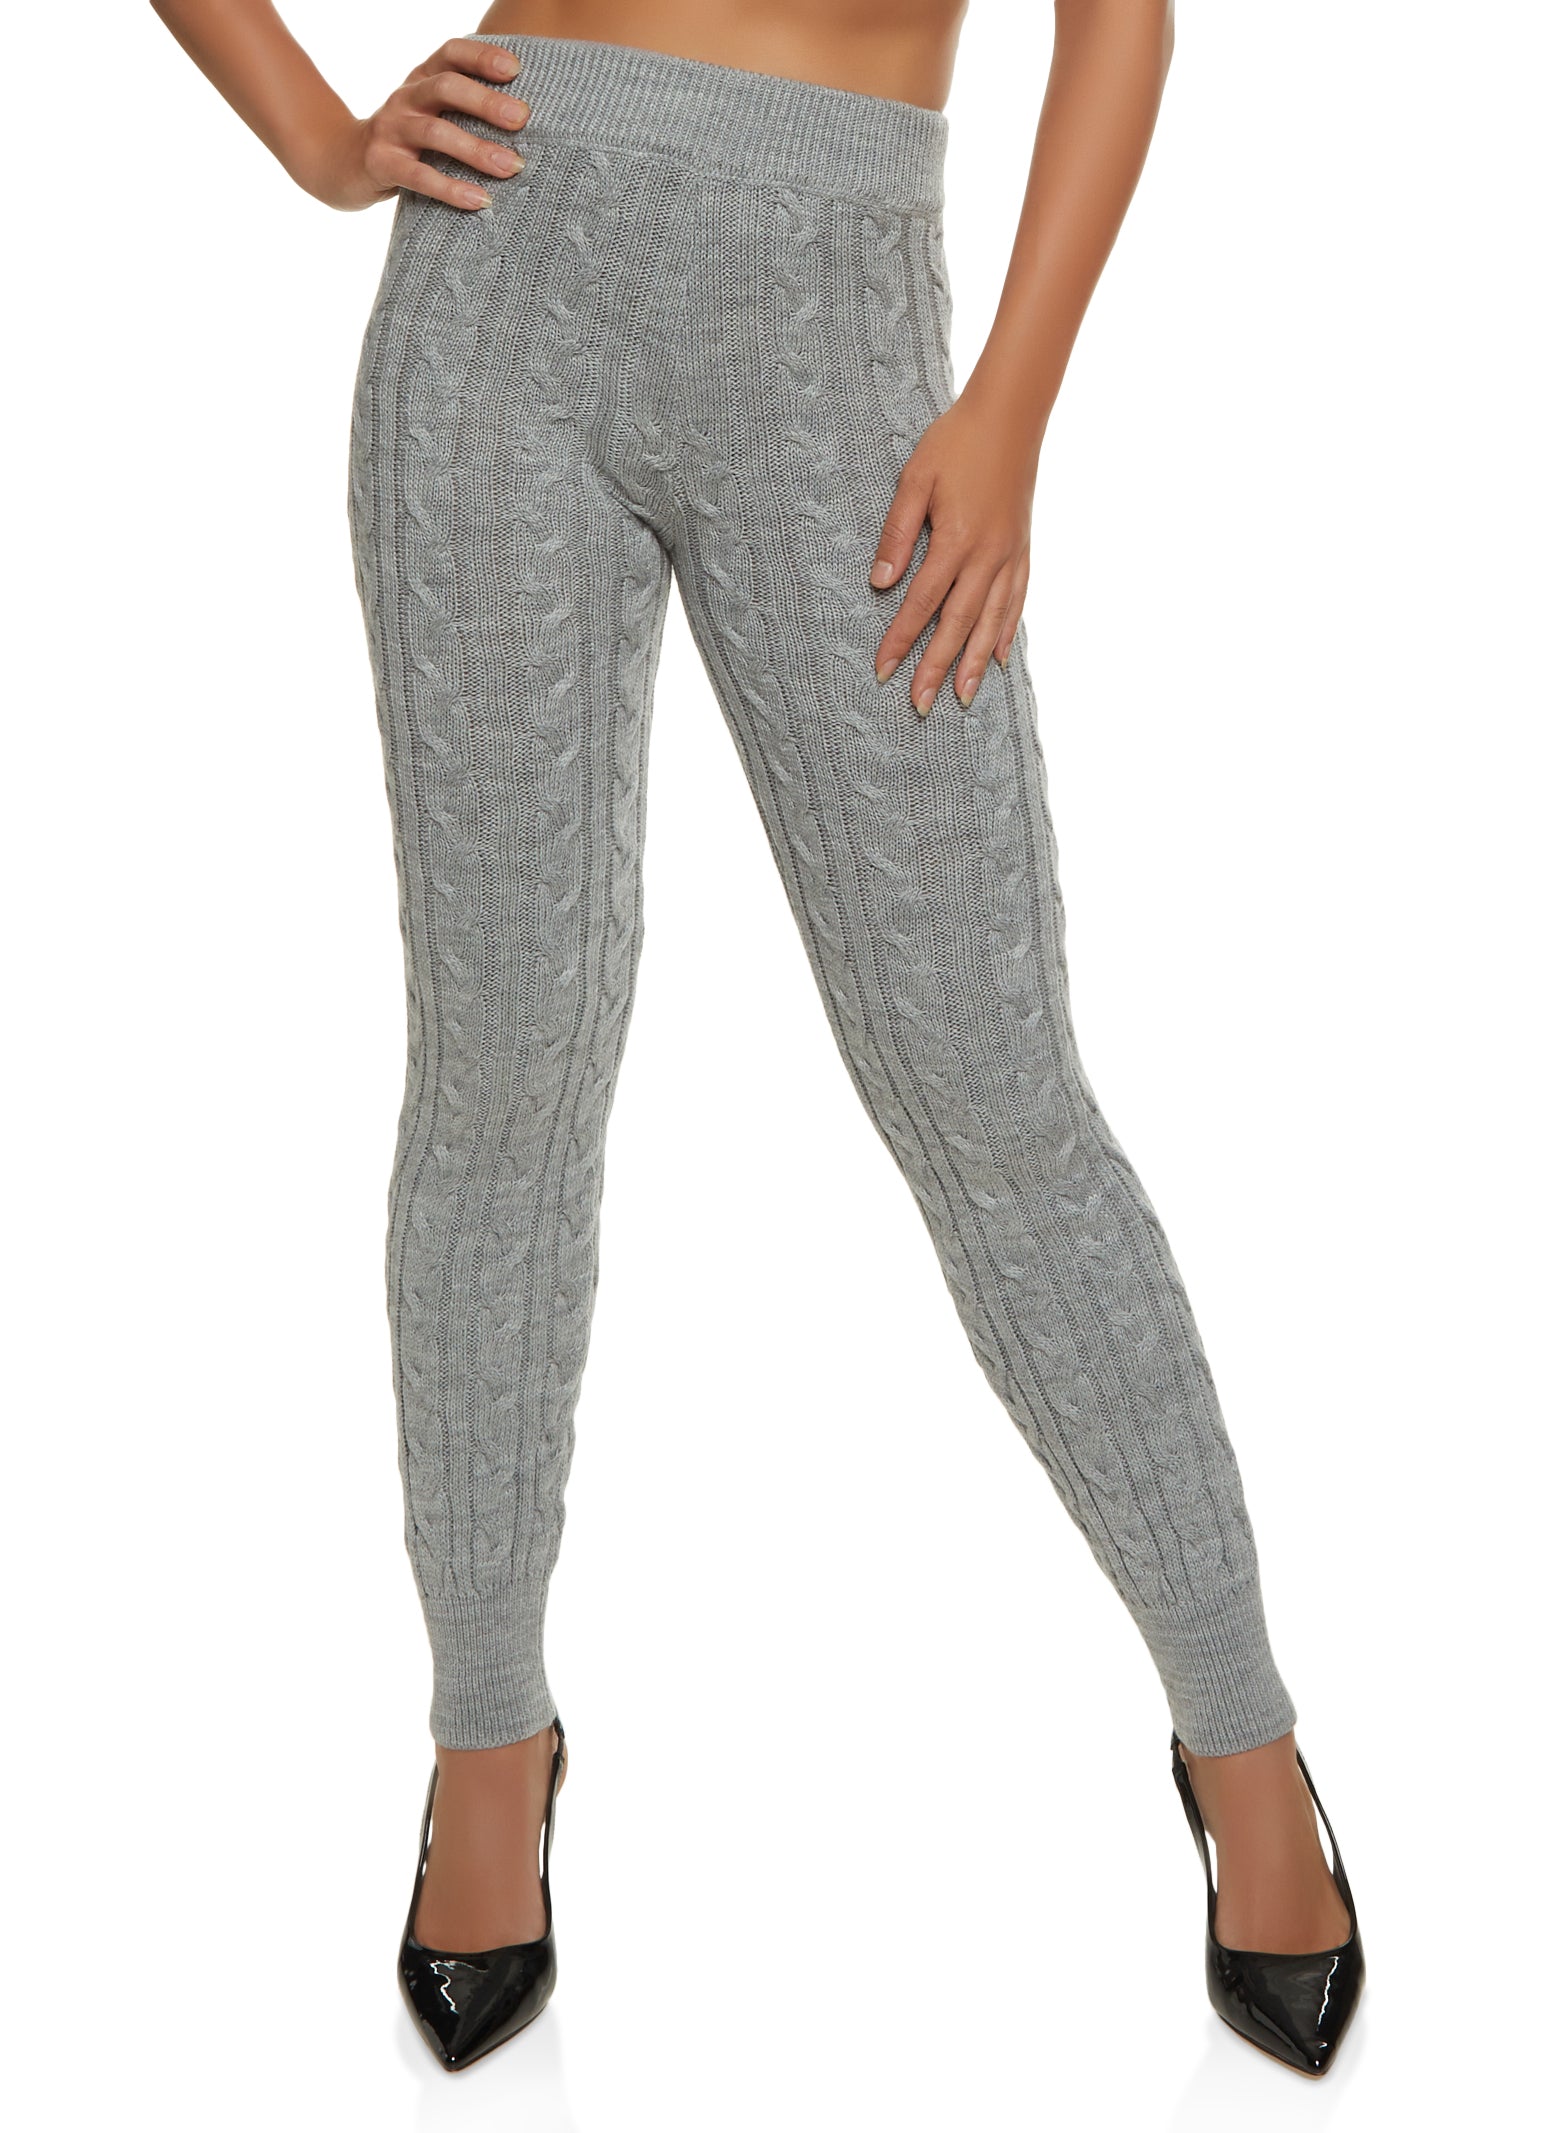 Cable Knit High Waist Leggings - Heather